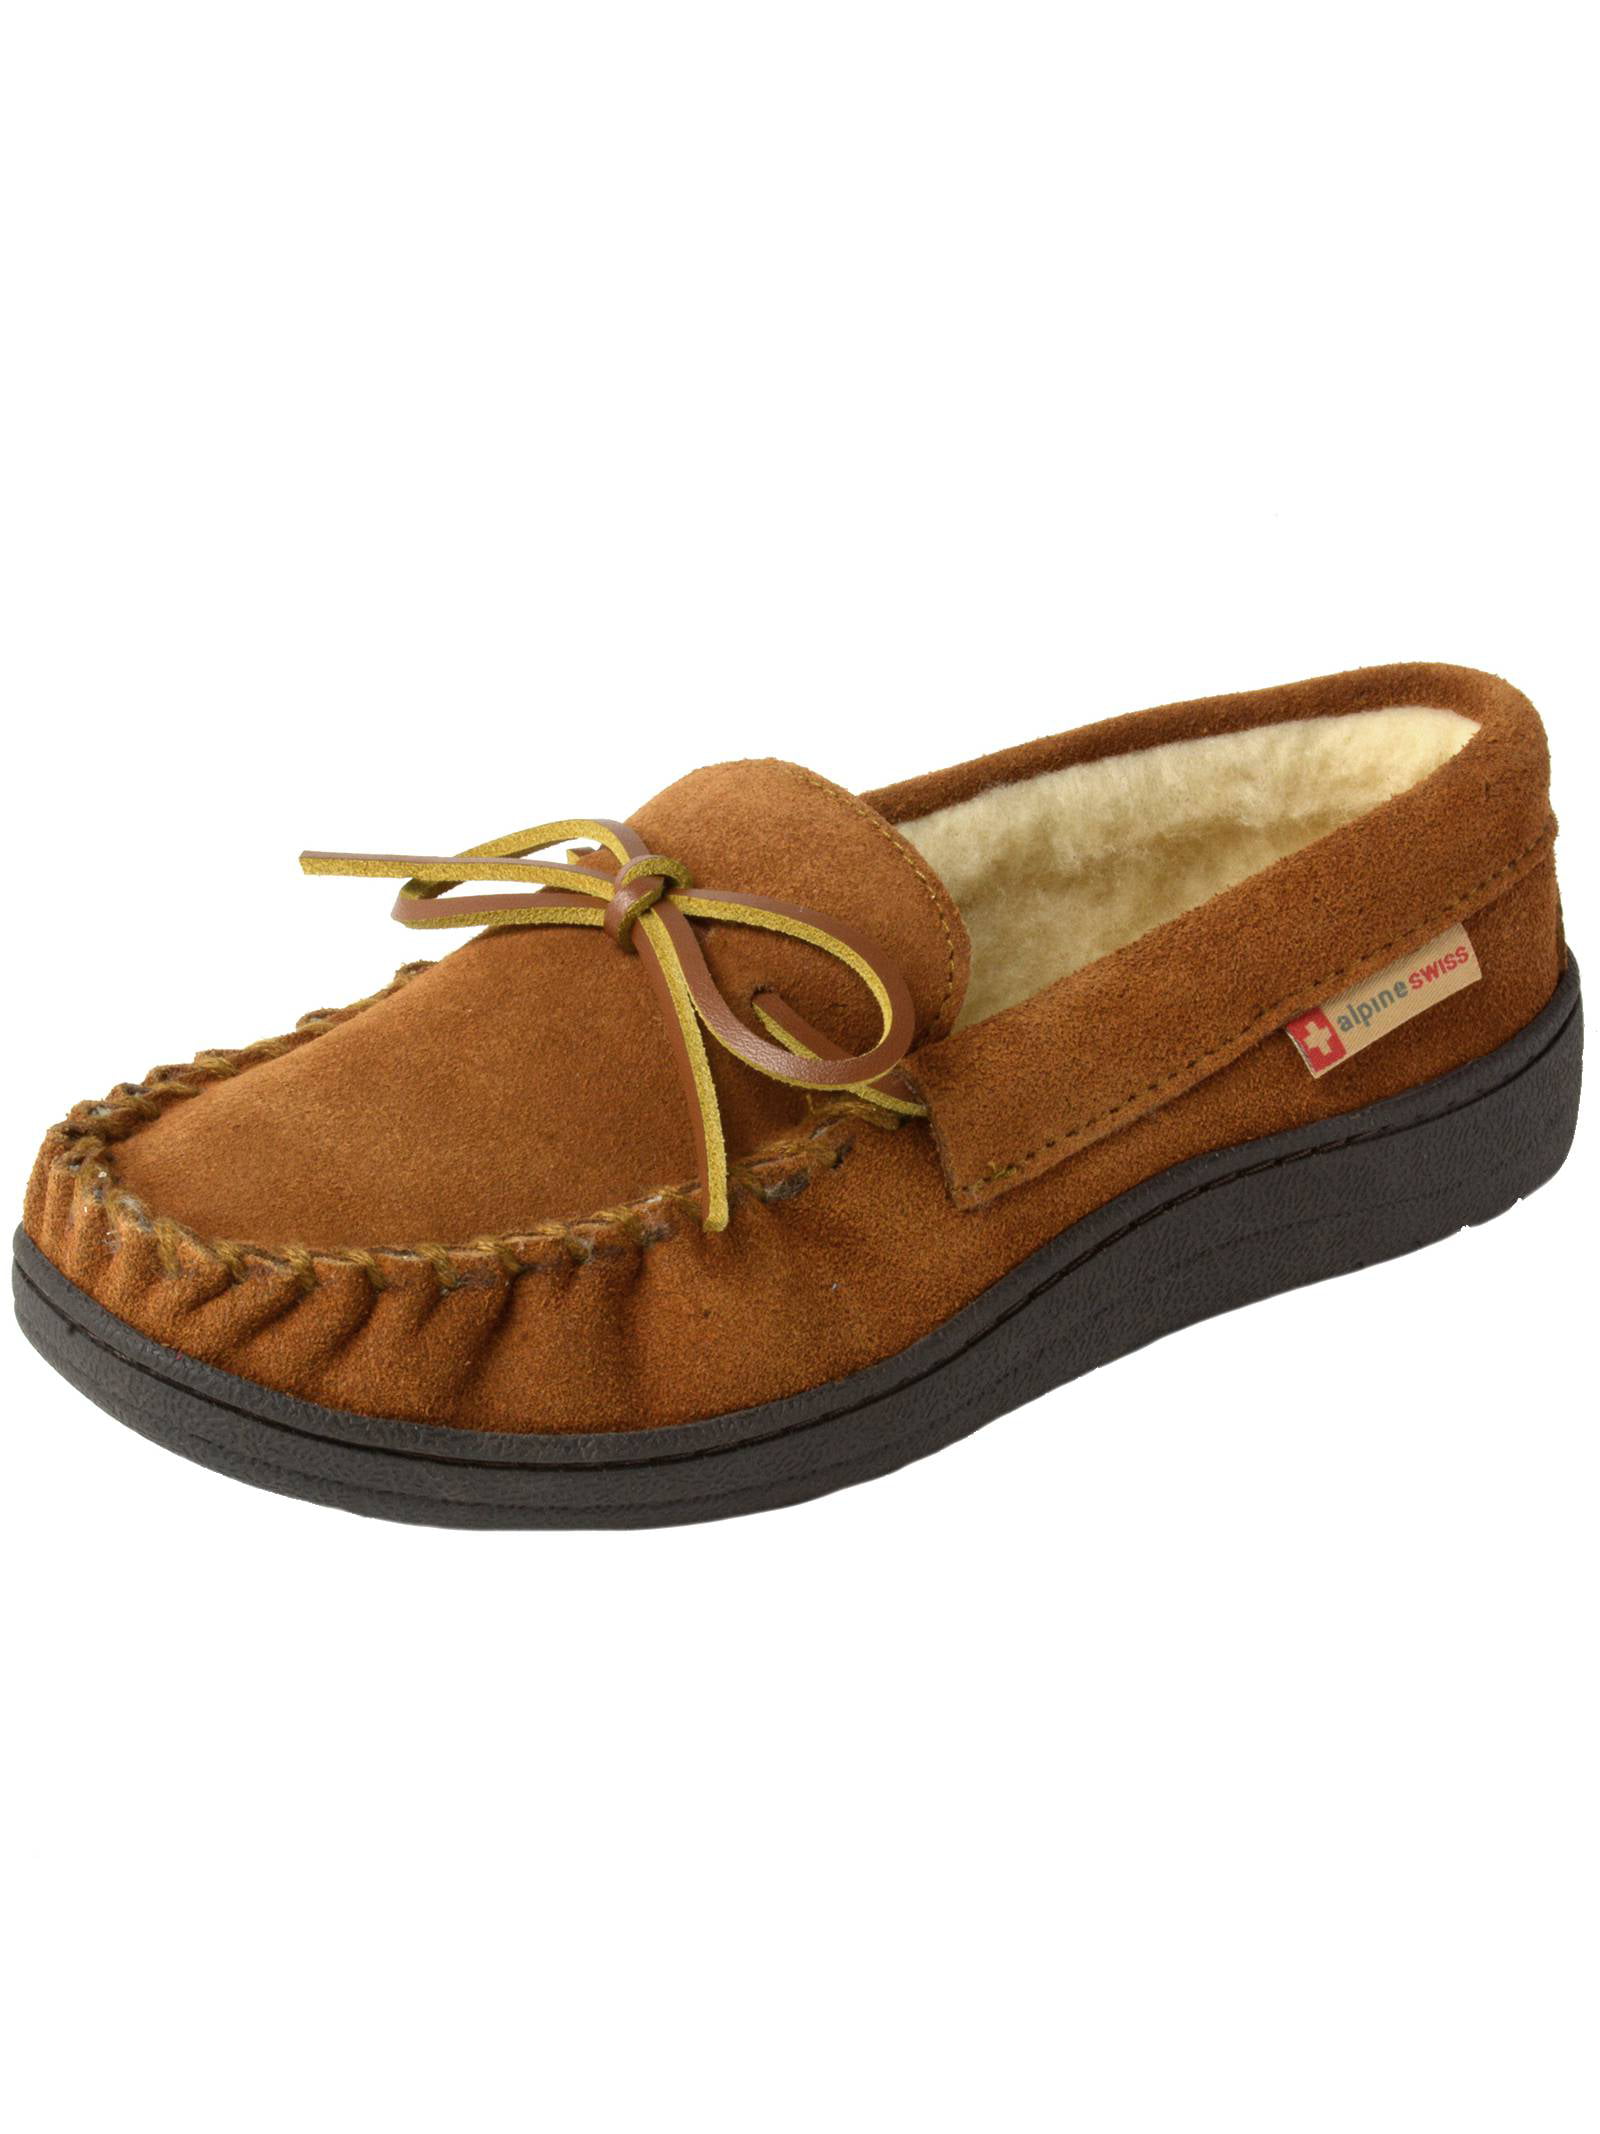 moccasin bedroom shoes